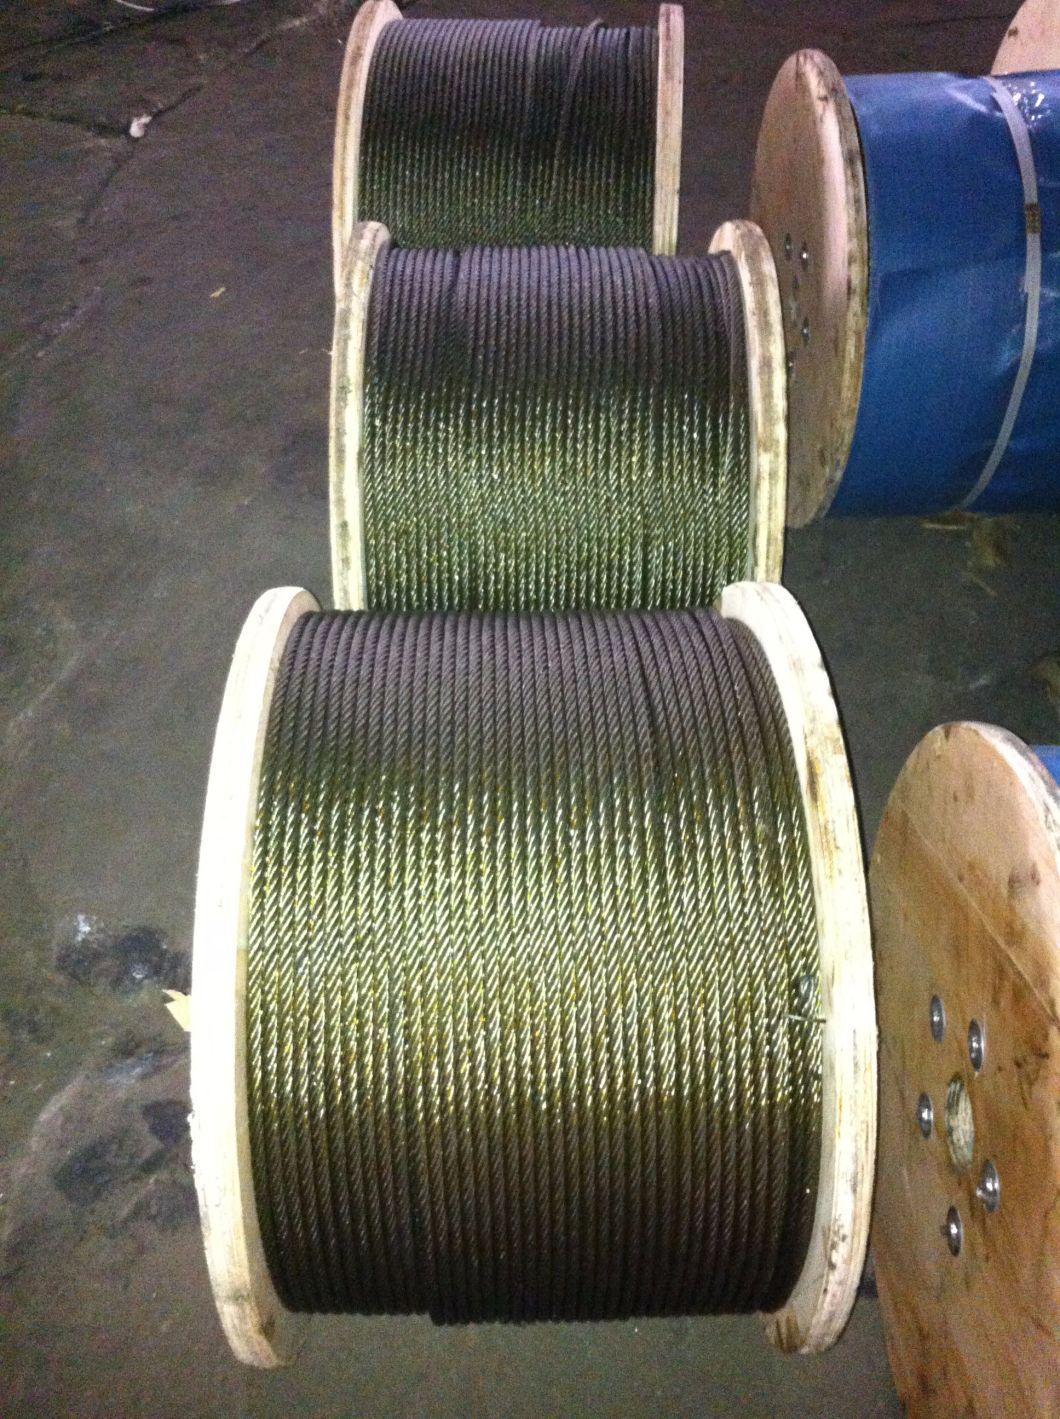 Galvanized and Ungalvanized Rope 6X19+Iwrc with Strong Wooden Reel Packing